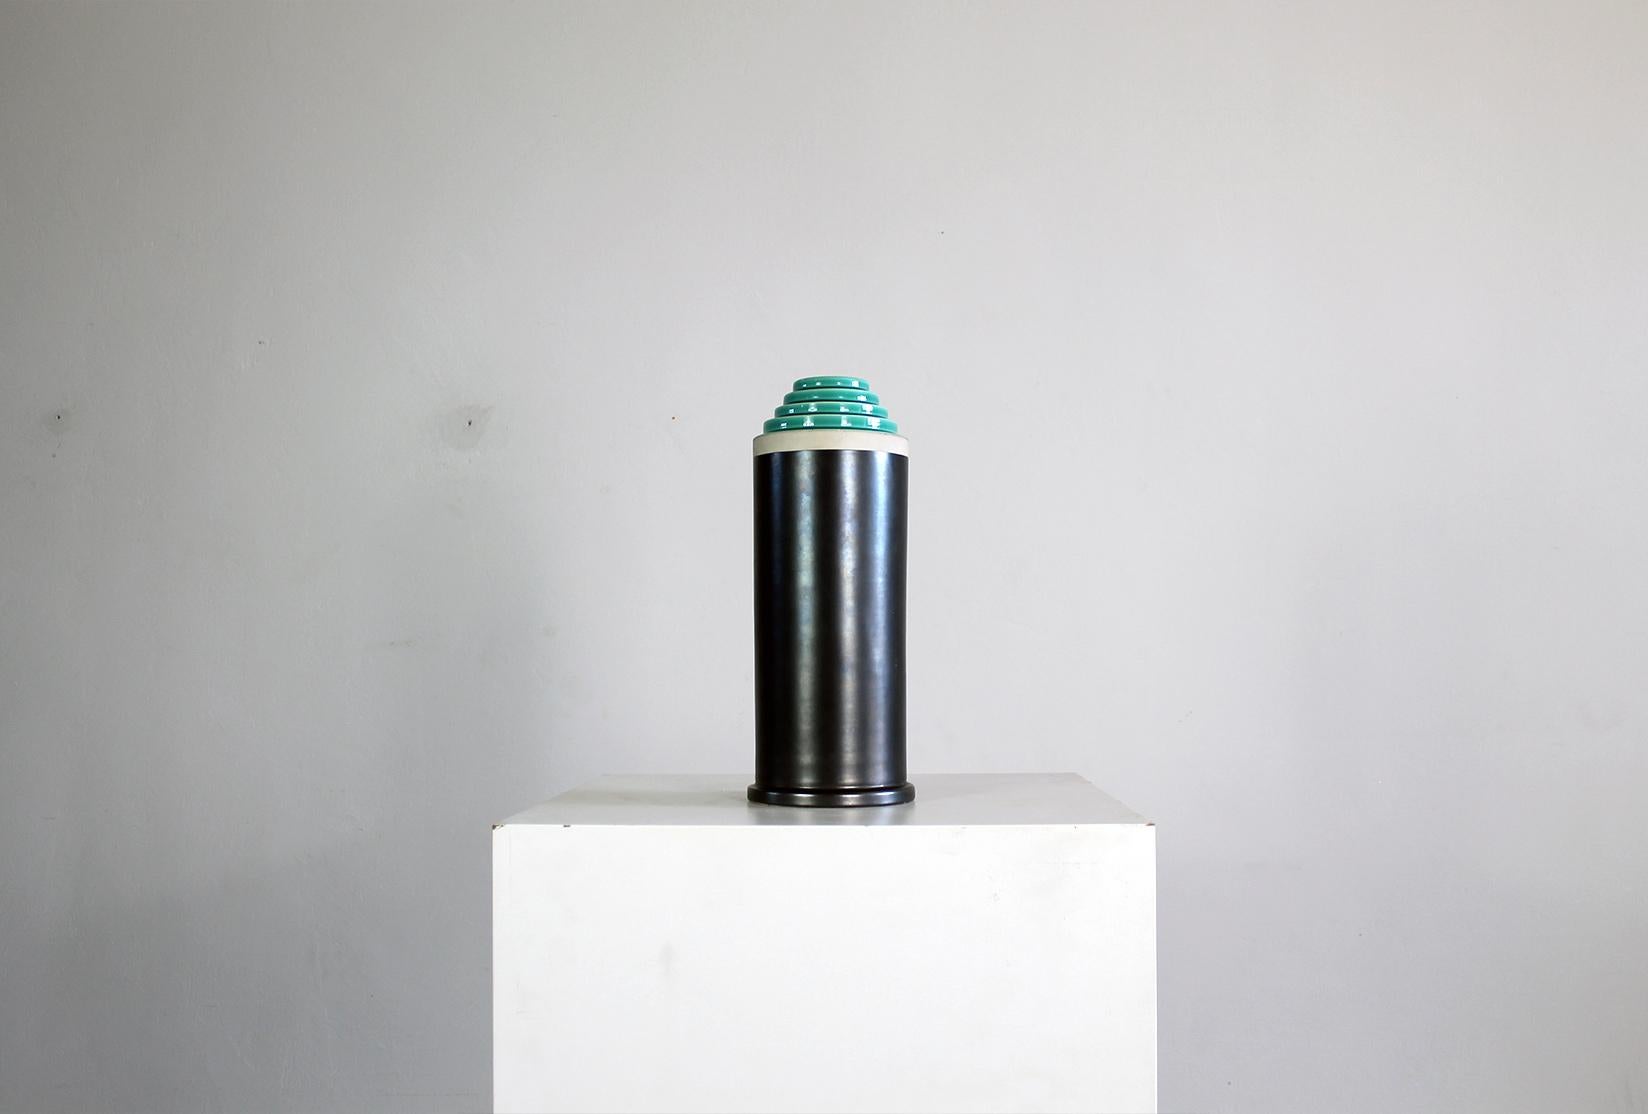 Post-Modern Ettore Sottsass Vase from Stepped Series in Enameled Ceramic by Bitossi 1990s For Sale